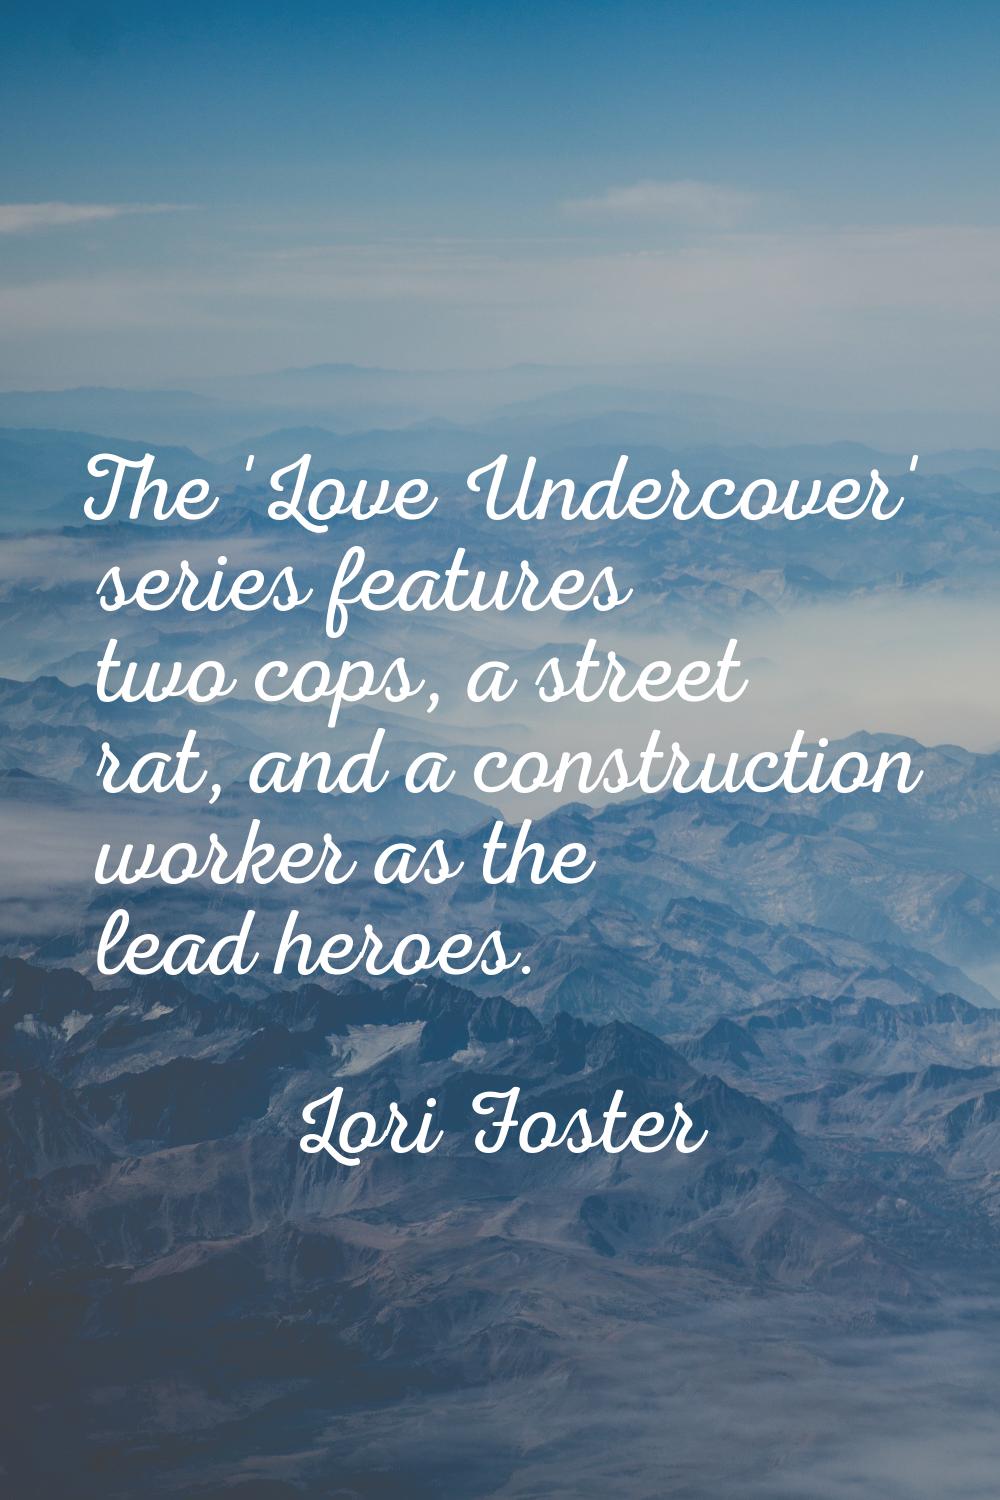 The 'Love Undercover' series features two cops, a street rat, and a construction worker as the lead